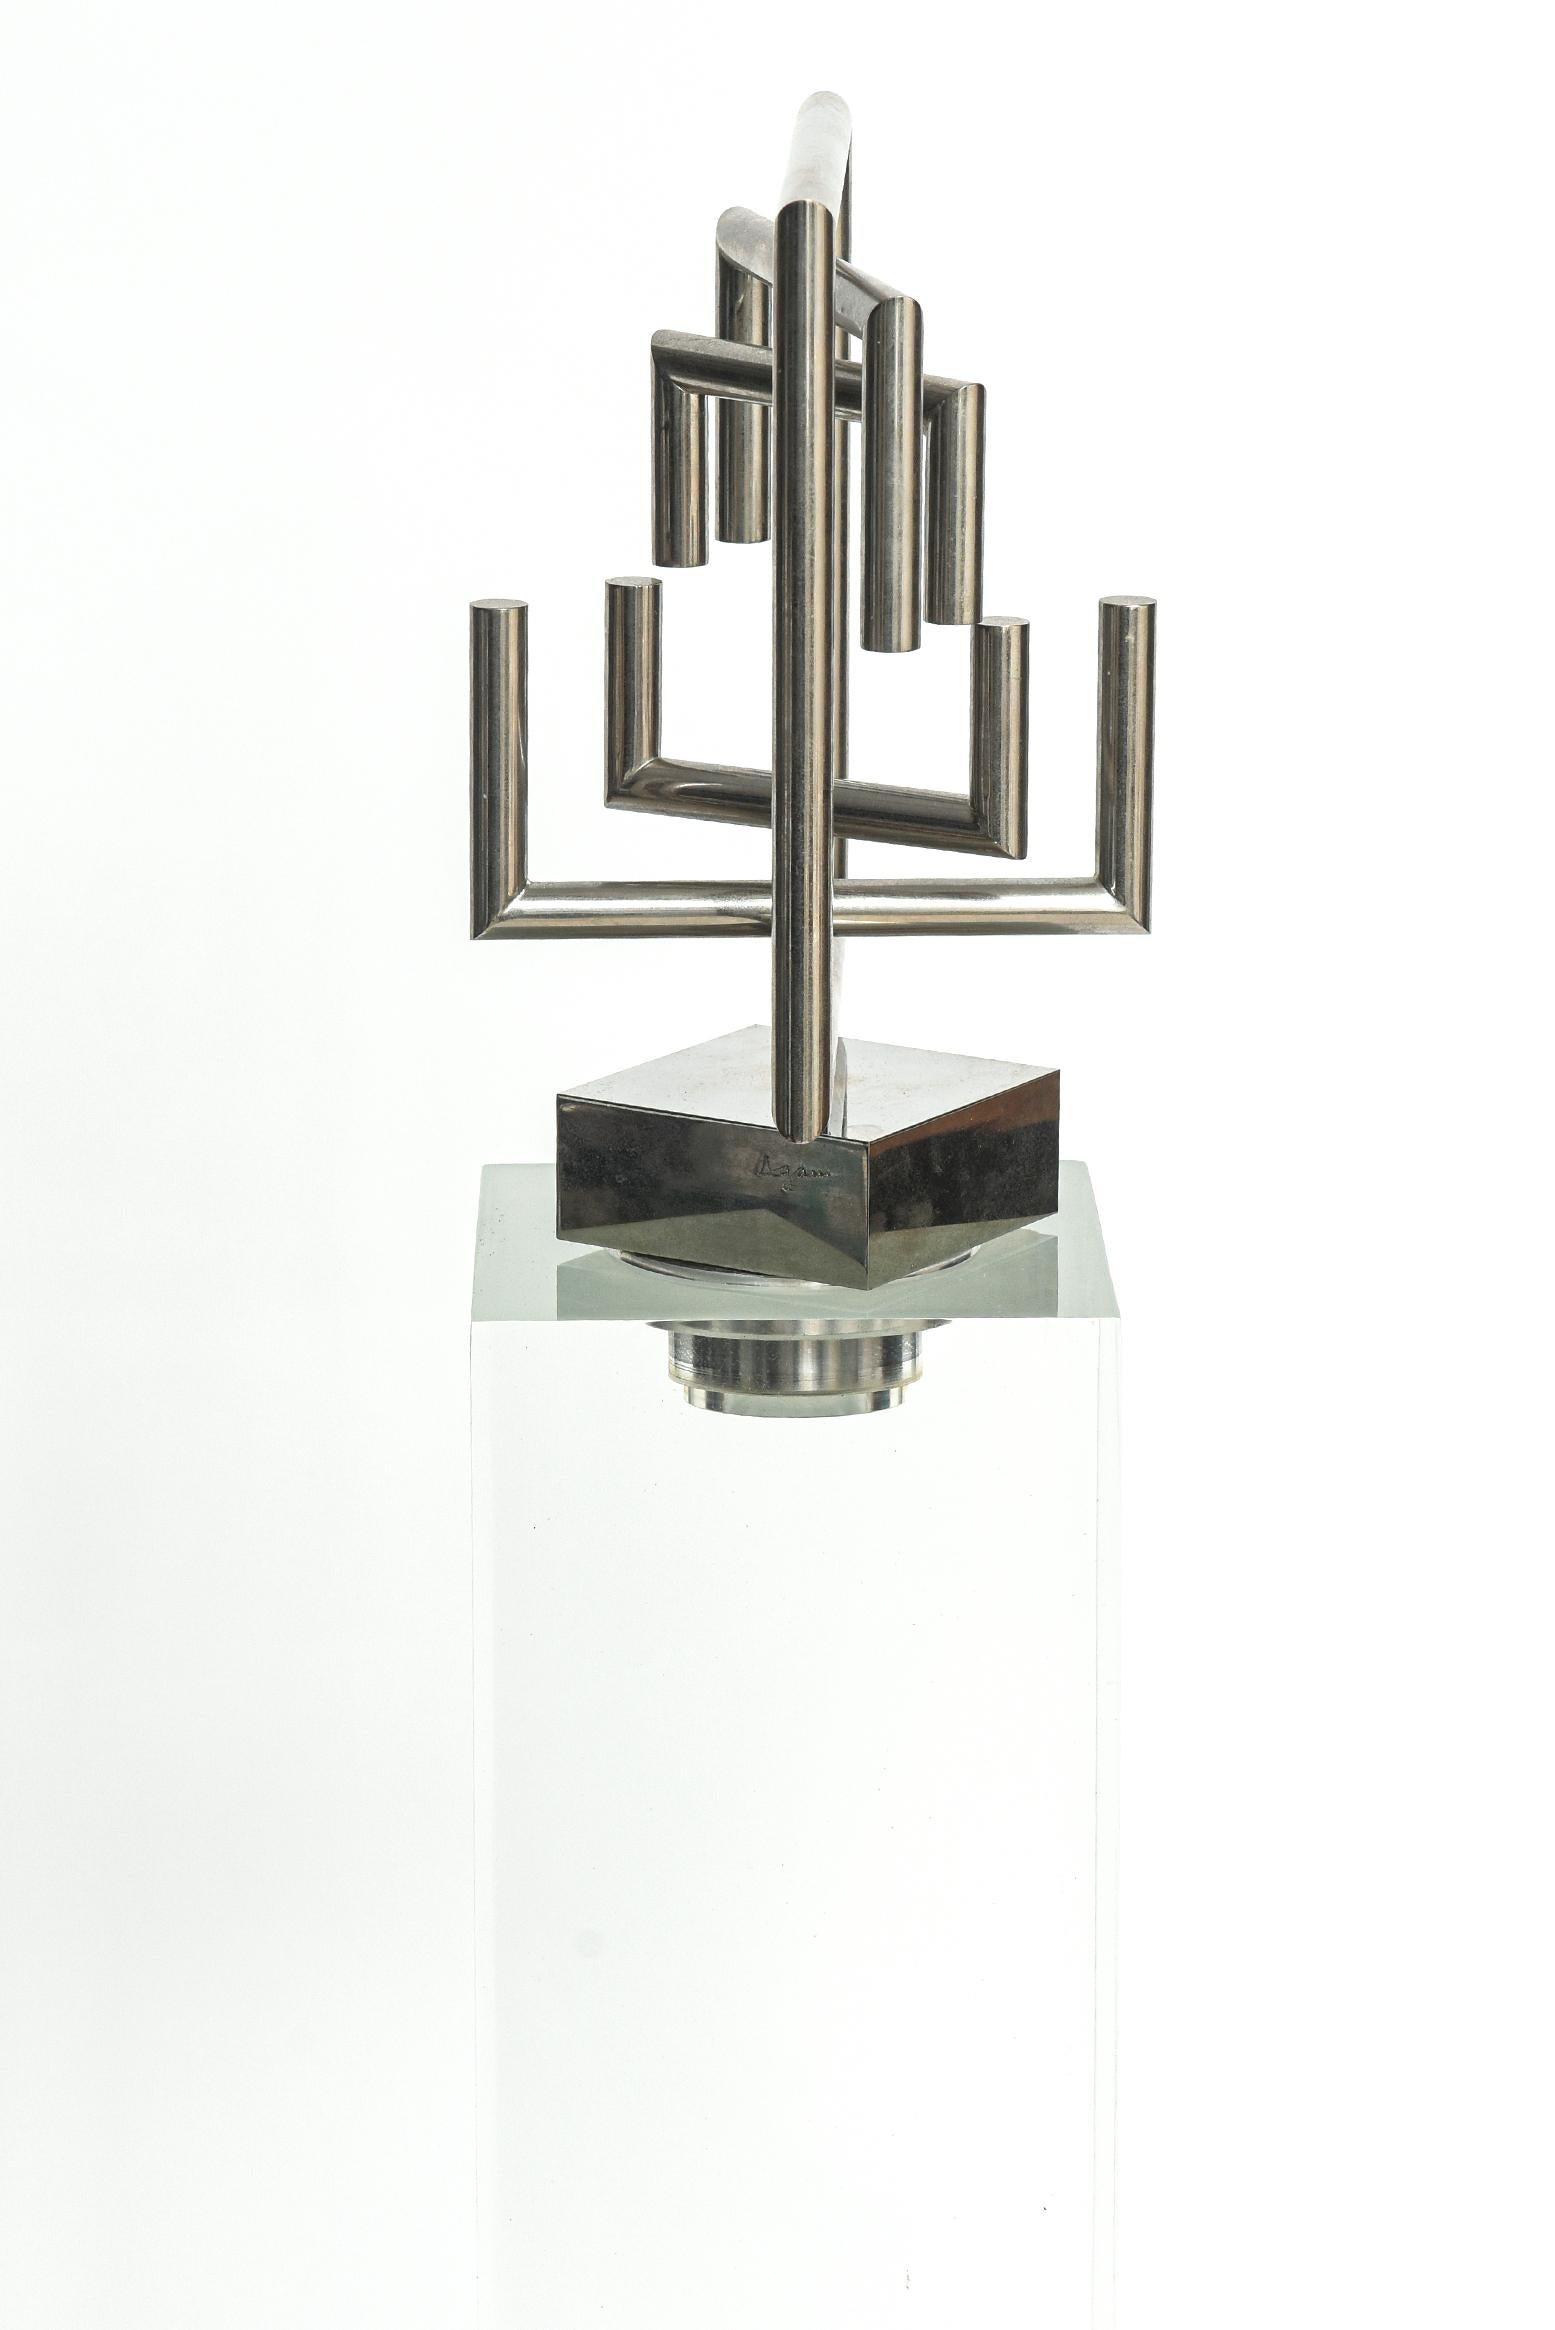 Late 20th Century Agam Kinetic Space Divider Sculpture Limited Edition Artist Proof & Lucite Stand For Sale